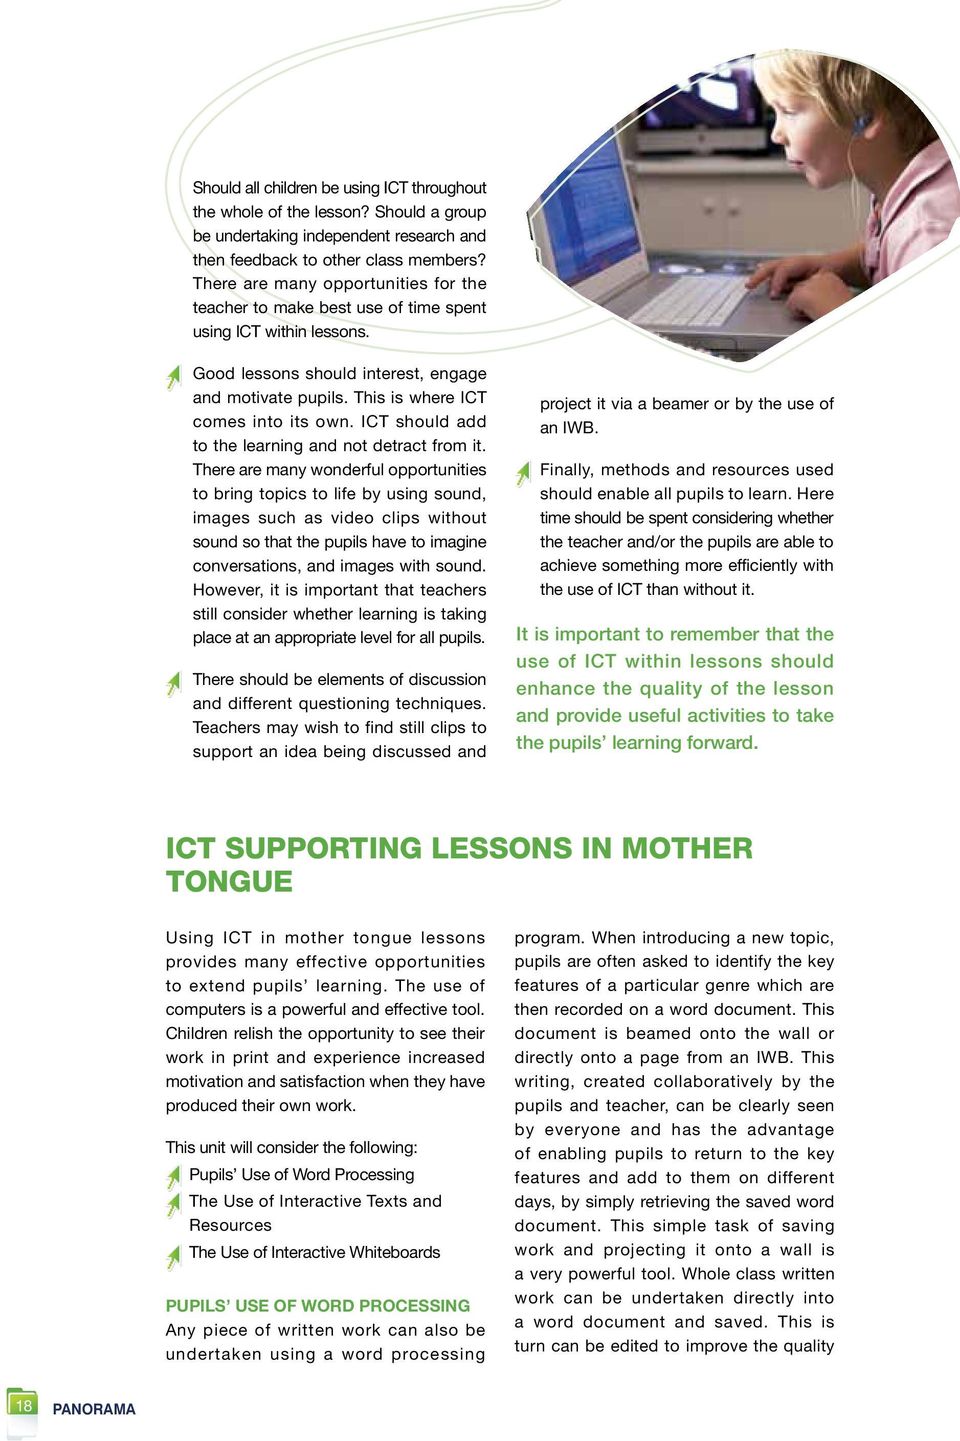 ICT should add to the learning and not detract from it.